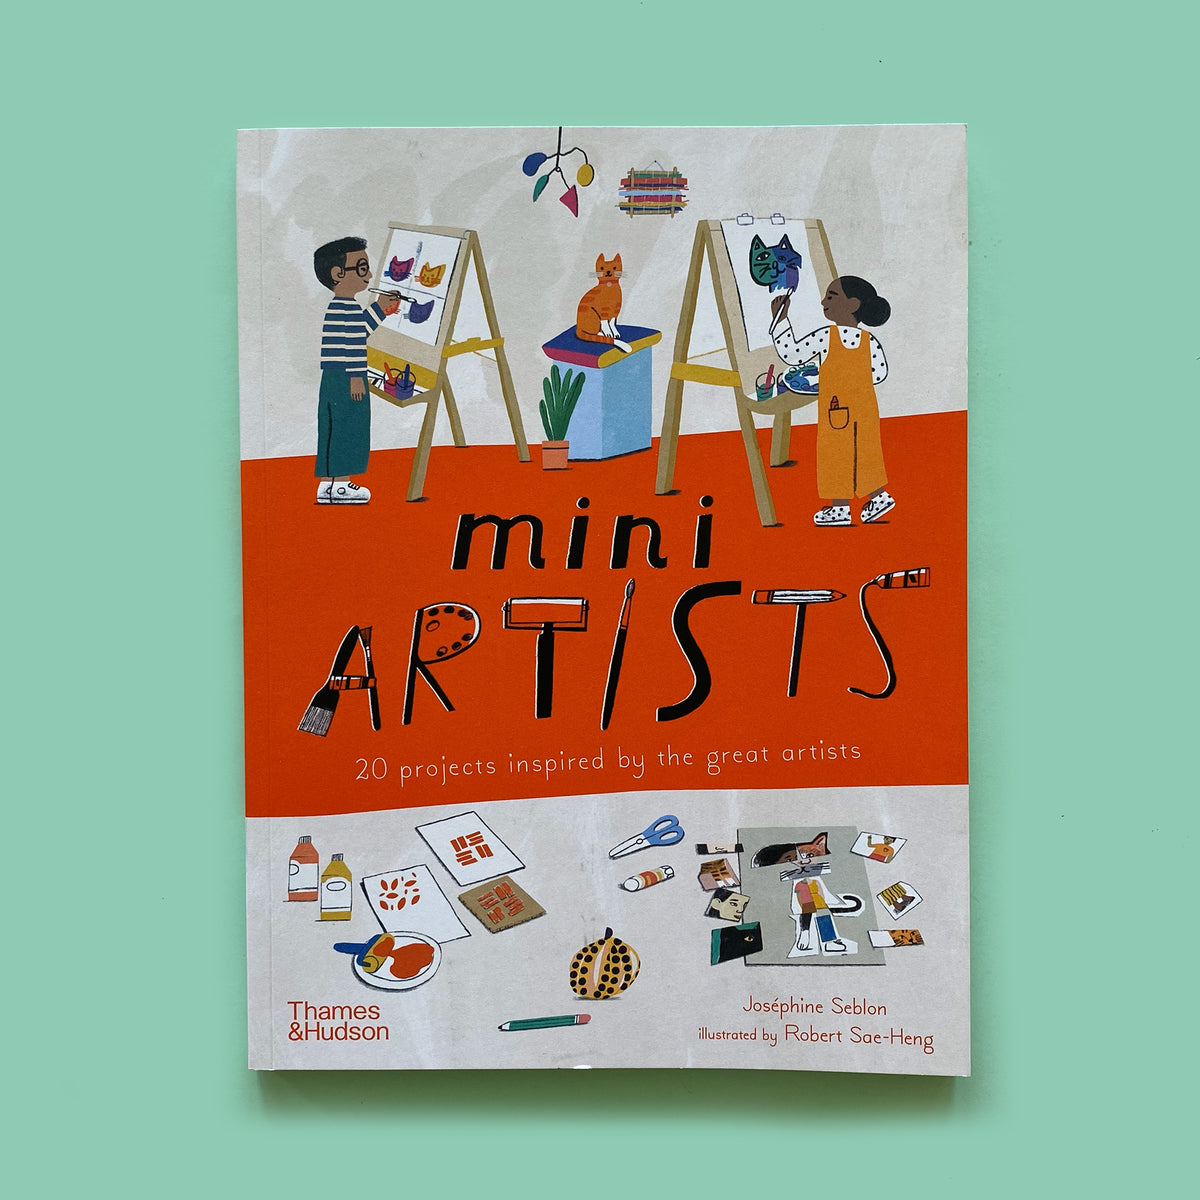 25 Children's Book Lists About Art and Music + Art Projects - Pragmatic Mom